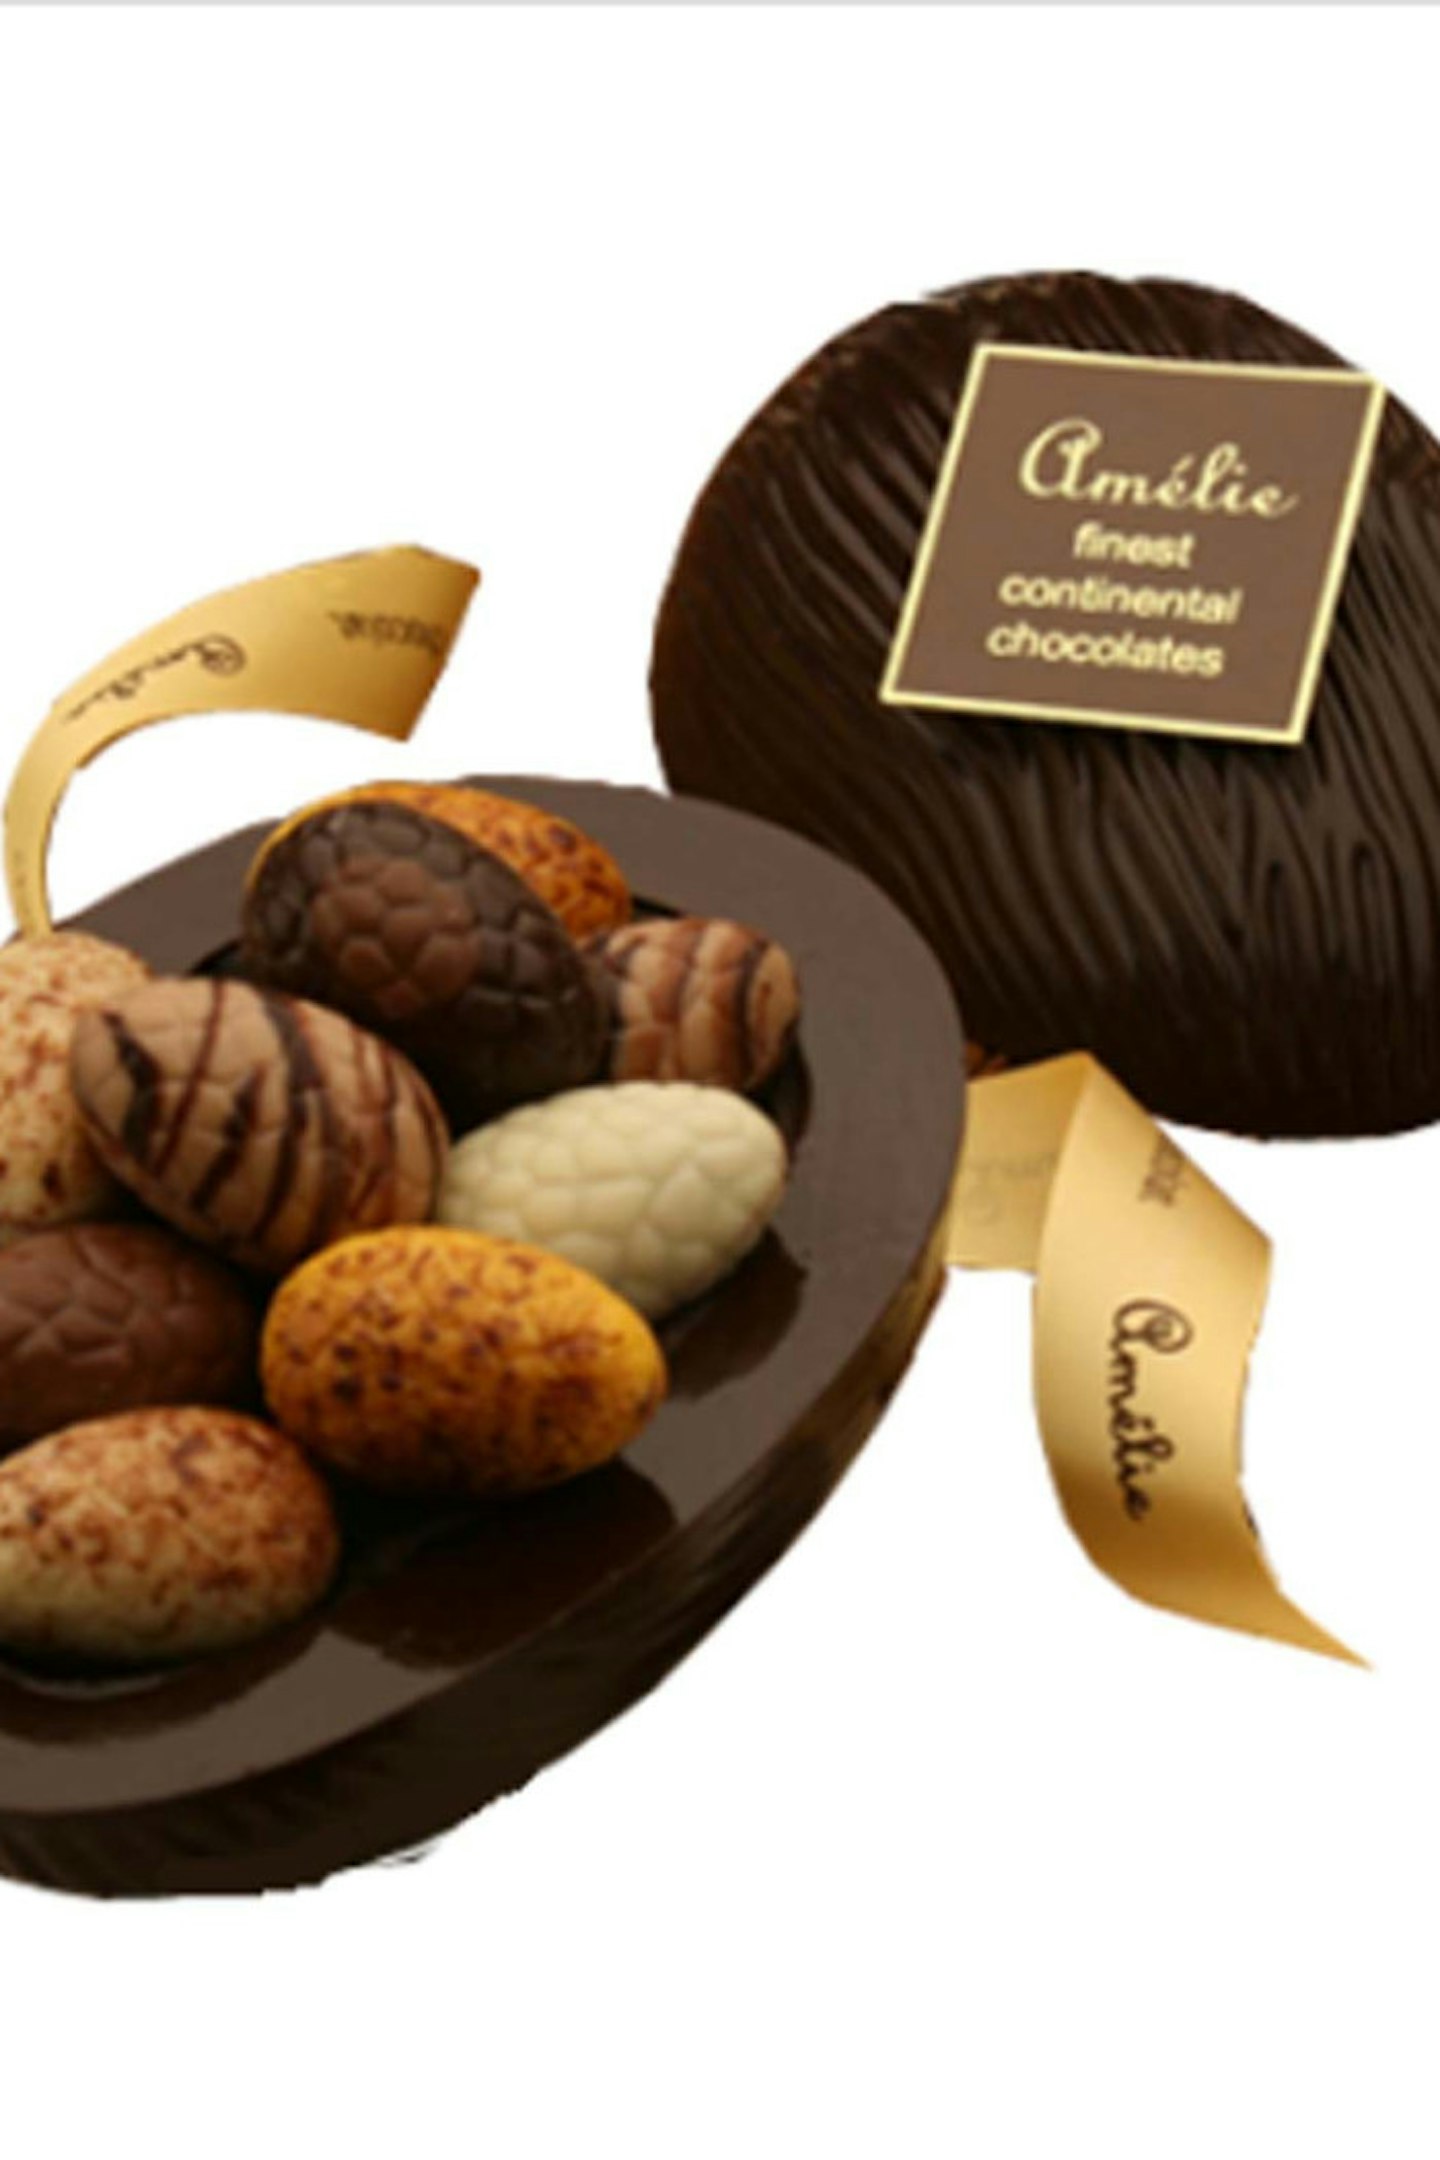 amelie chocolat traditional easter egg 24.95